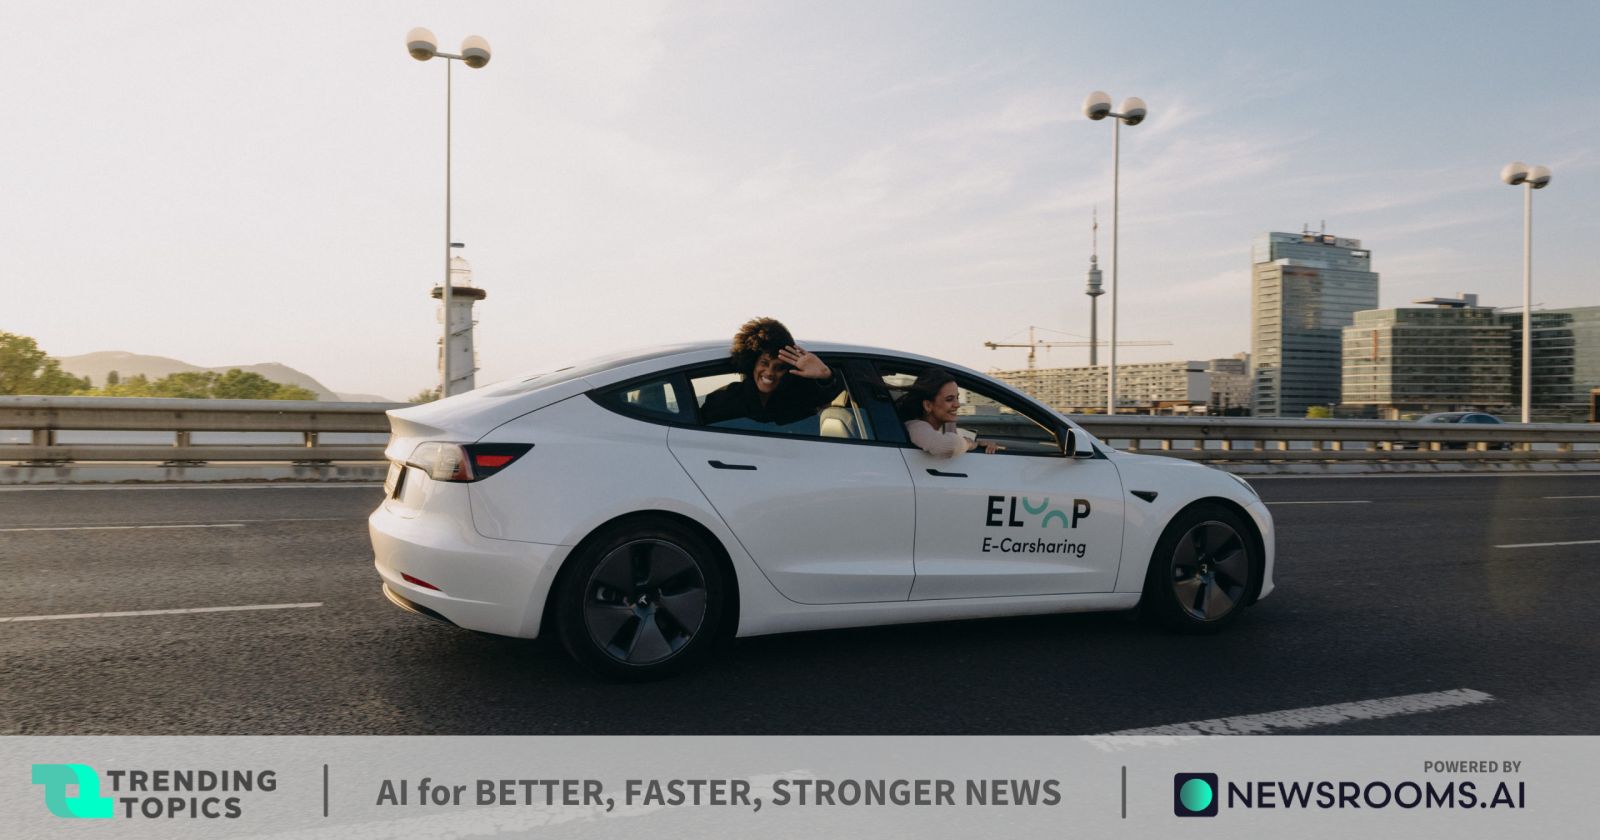 Startup Eloop is discontinuing Tesla car sharing and needs to be renovated